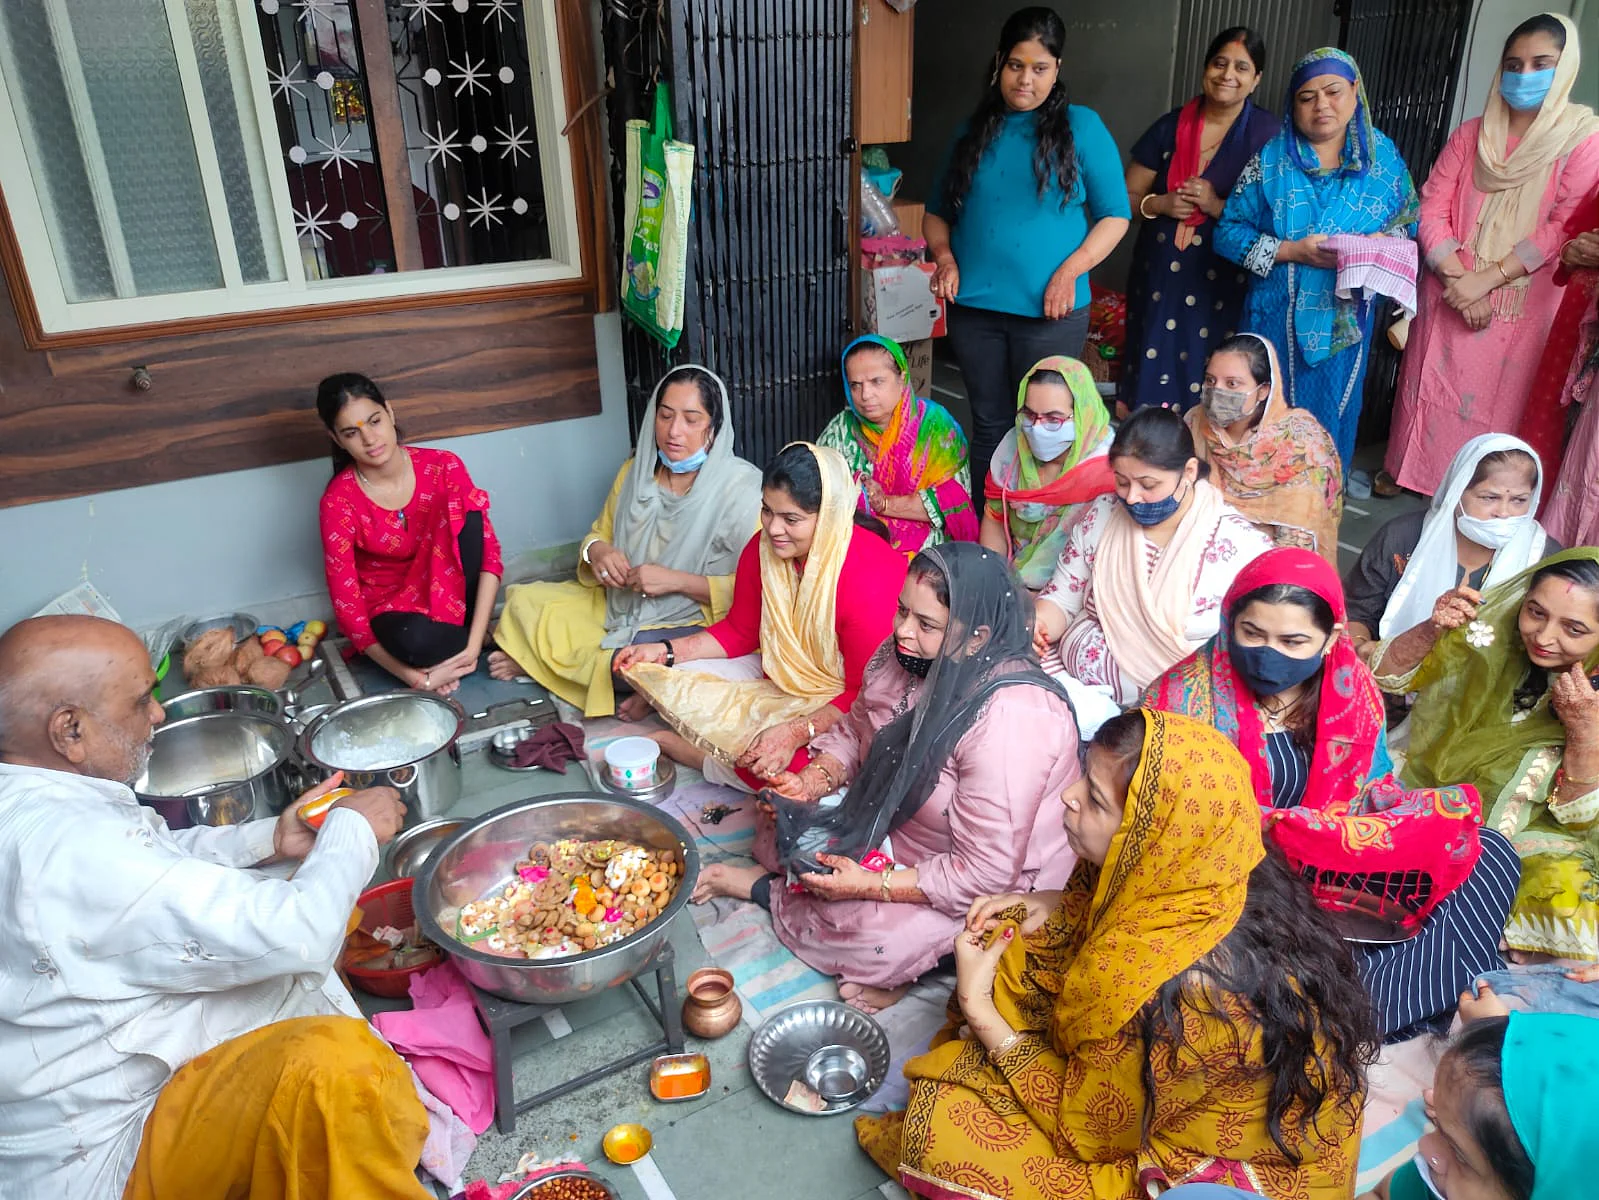 Celebration of Thadhri by Sindhis in Indore -Free Press Journal